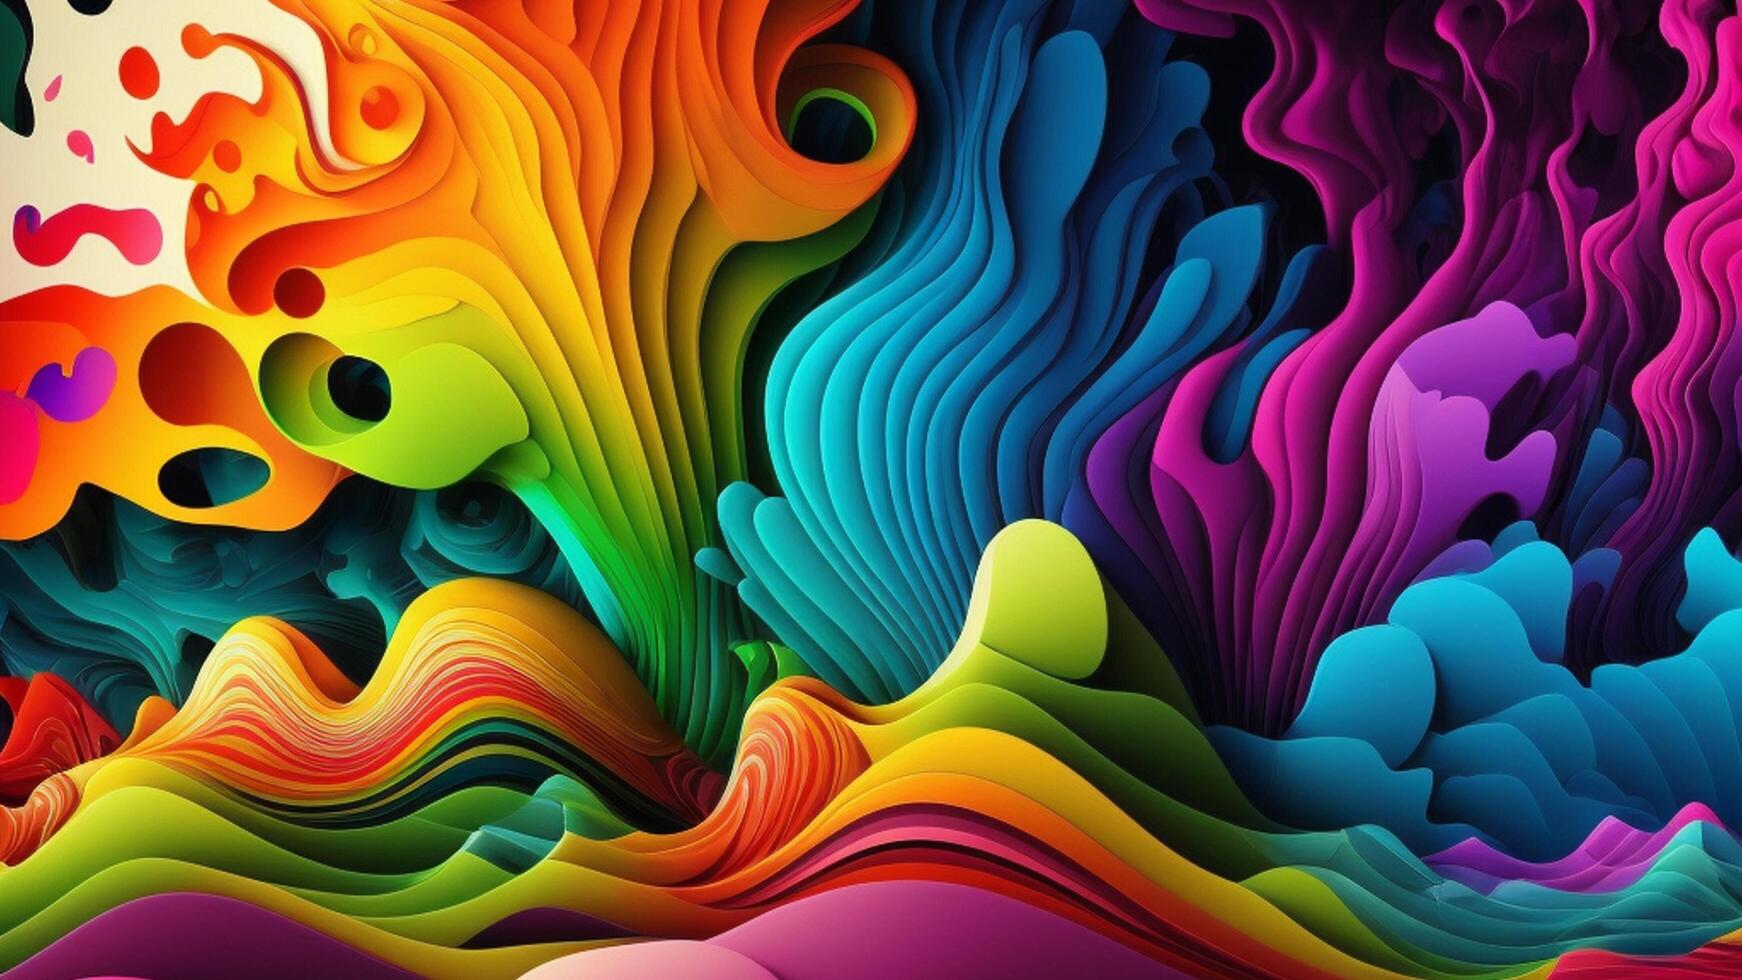 3D Texture Colorful Abstract Background for Desktop Wallpaper Image photo